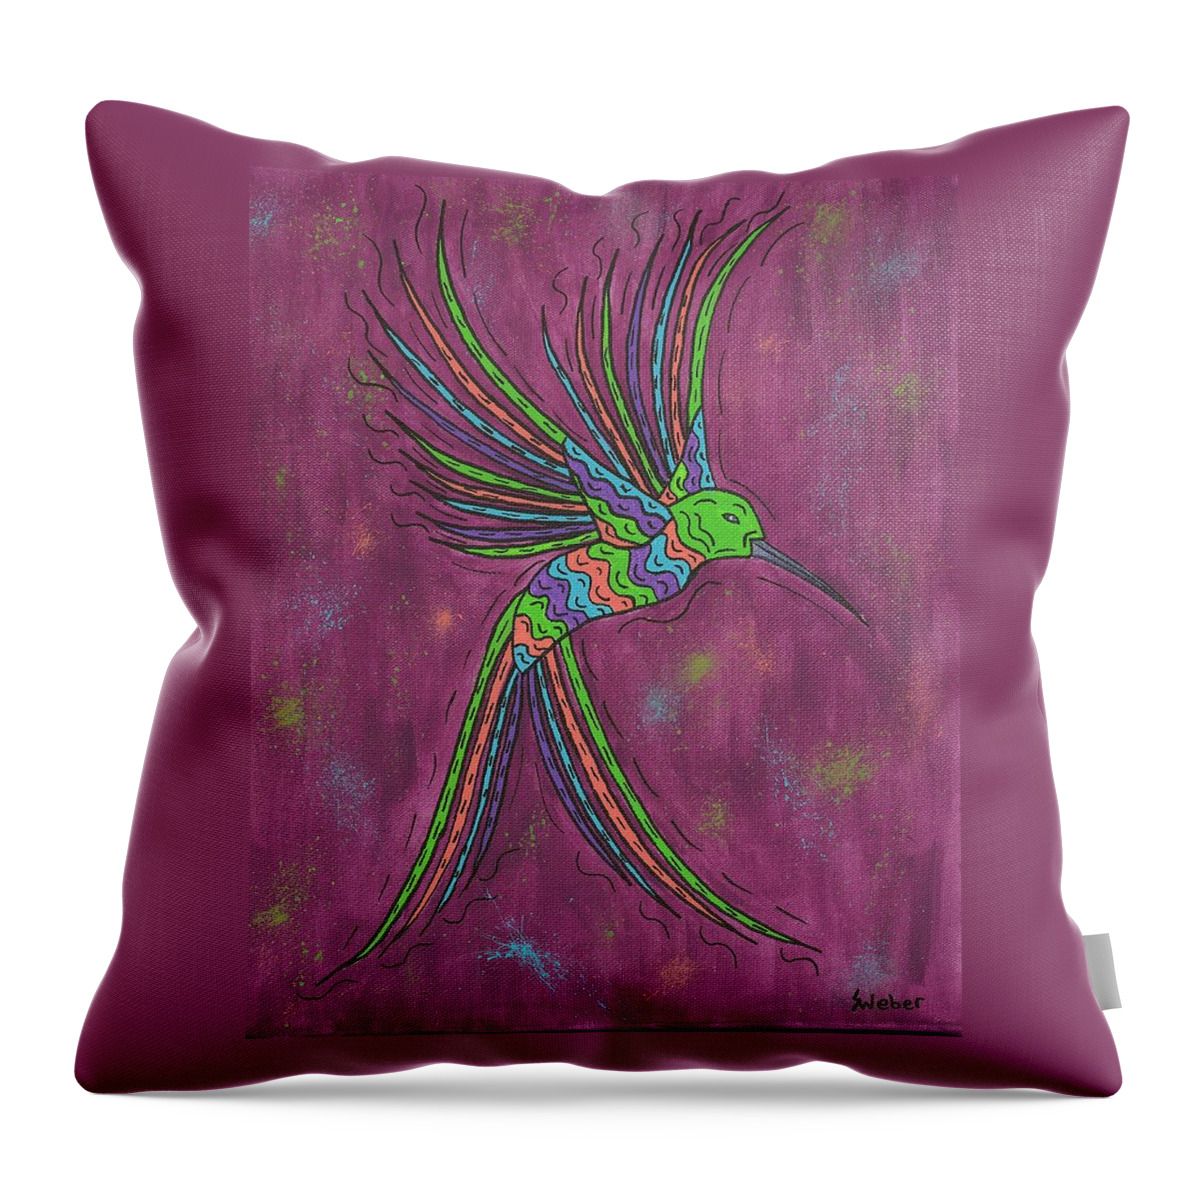 Black Throw Pillow featuring the painting Summer Hummer by Susie WEBER